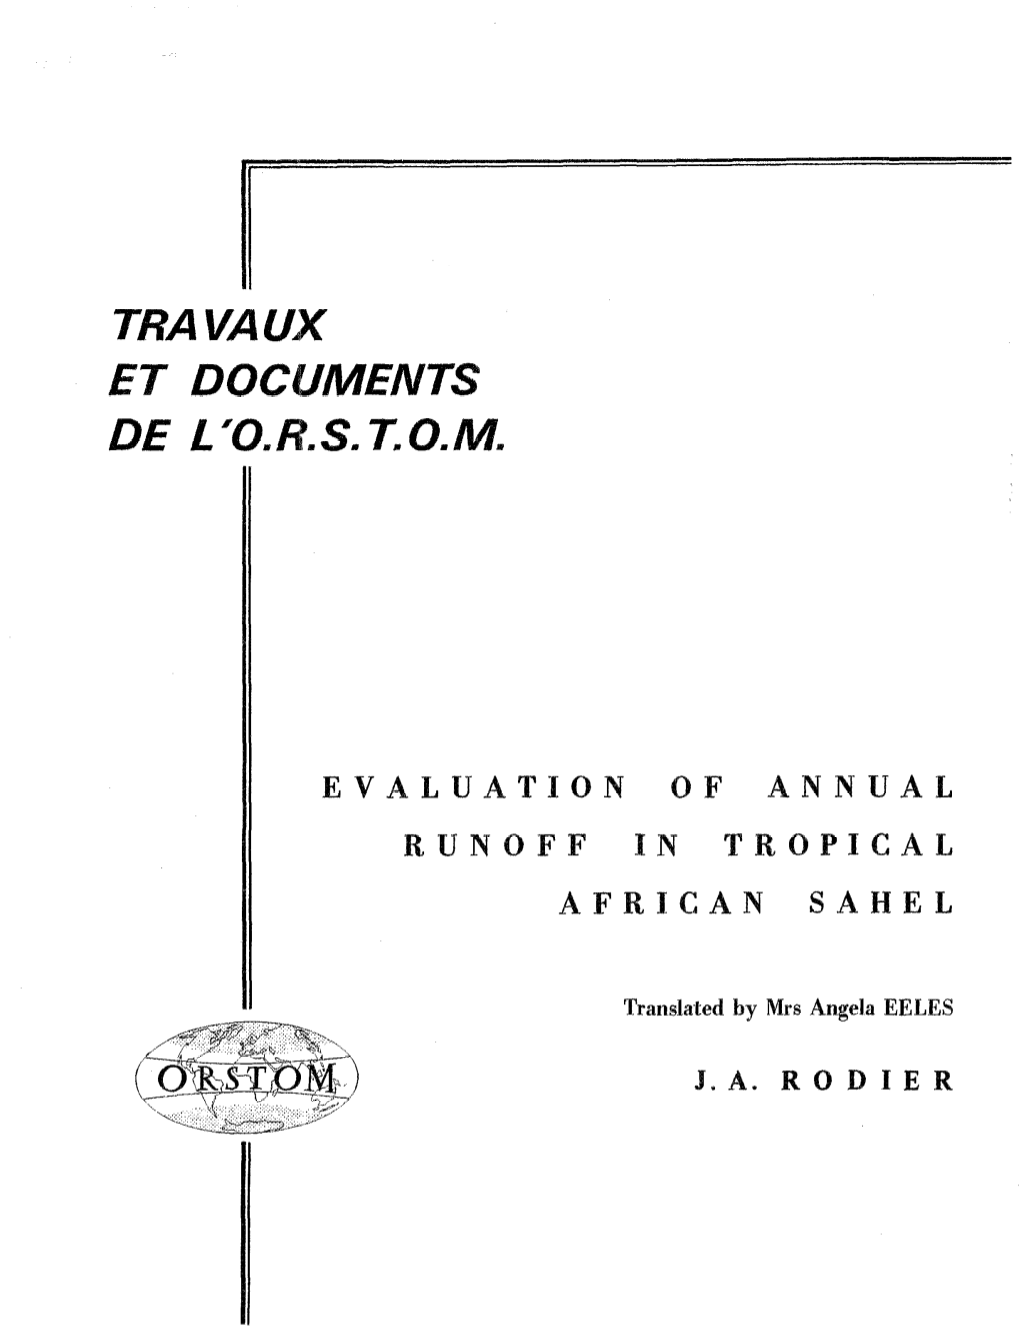 Evaluation of Annual Runoff in Tropical African Sahel